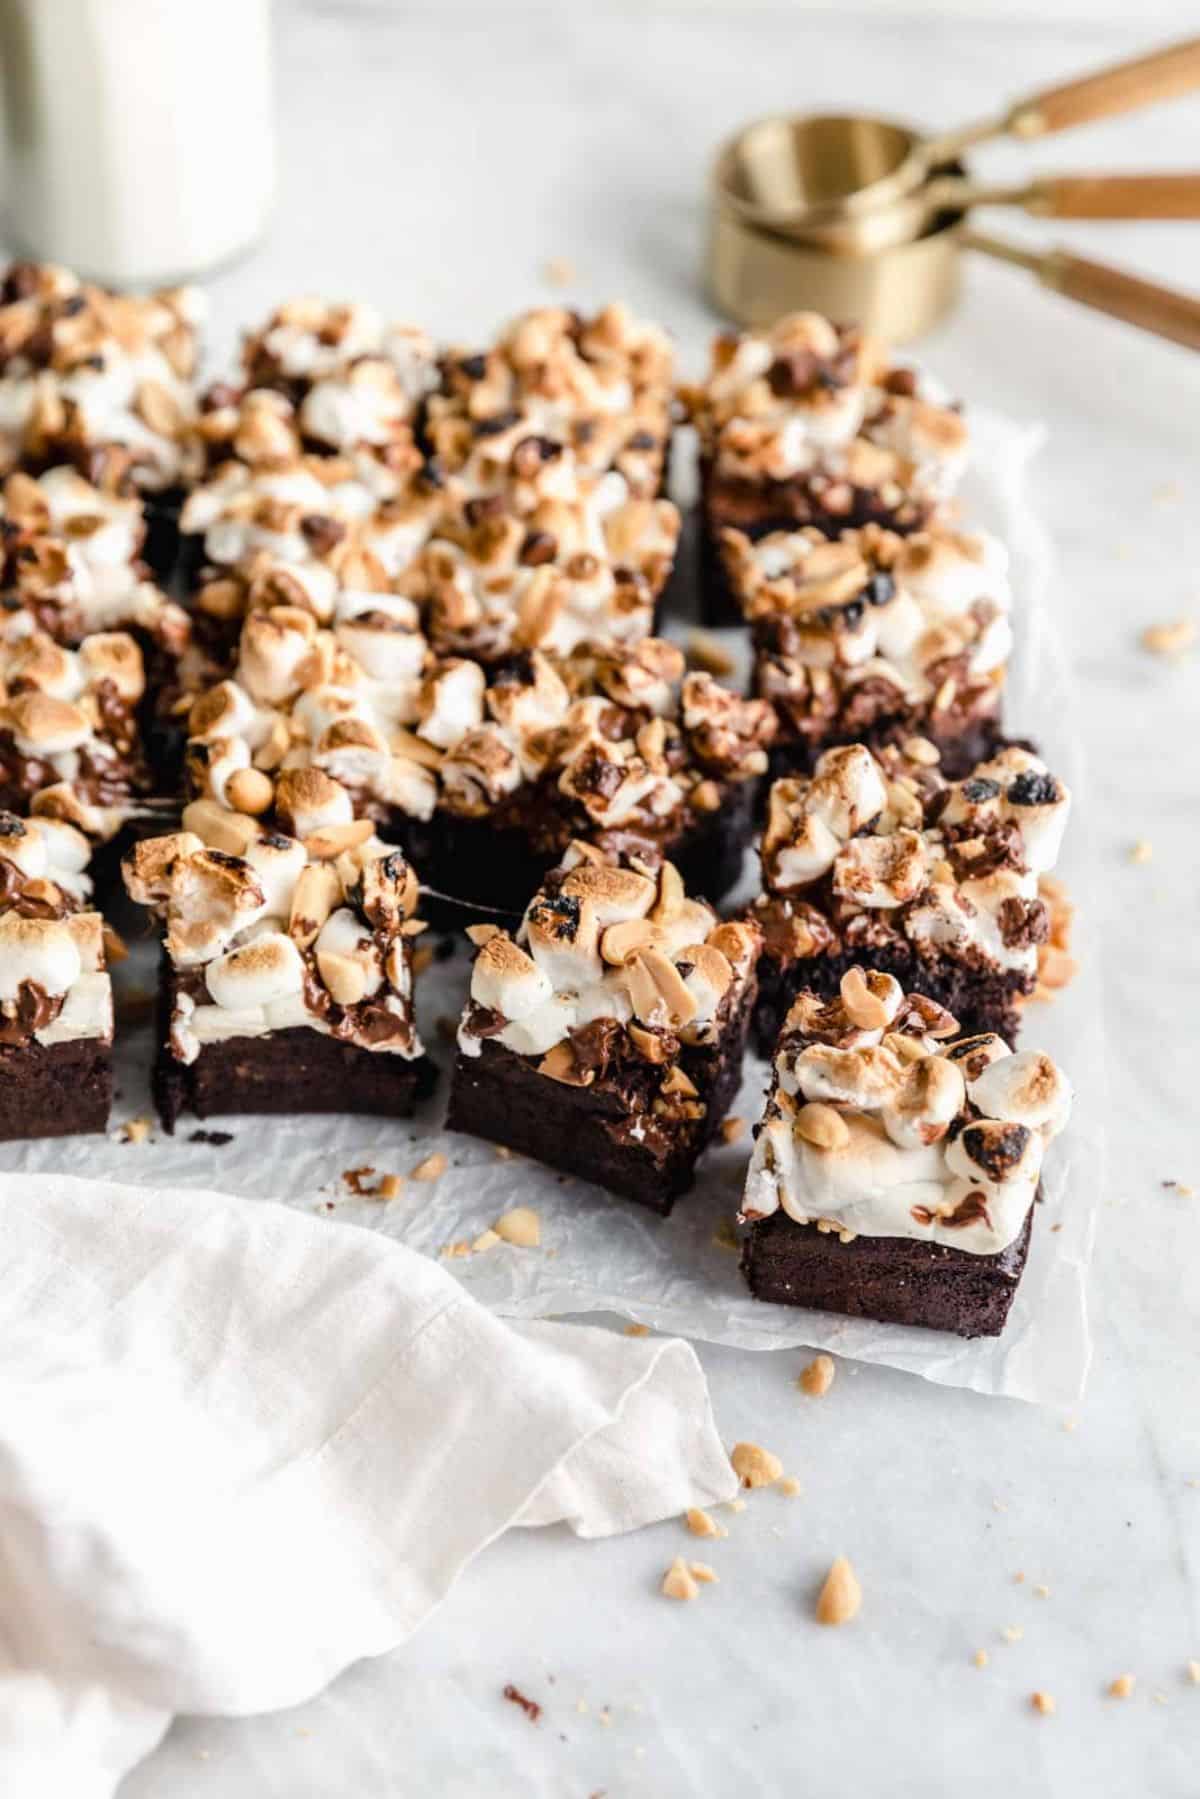 Delicious rocky road brownies on a table.